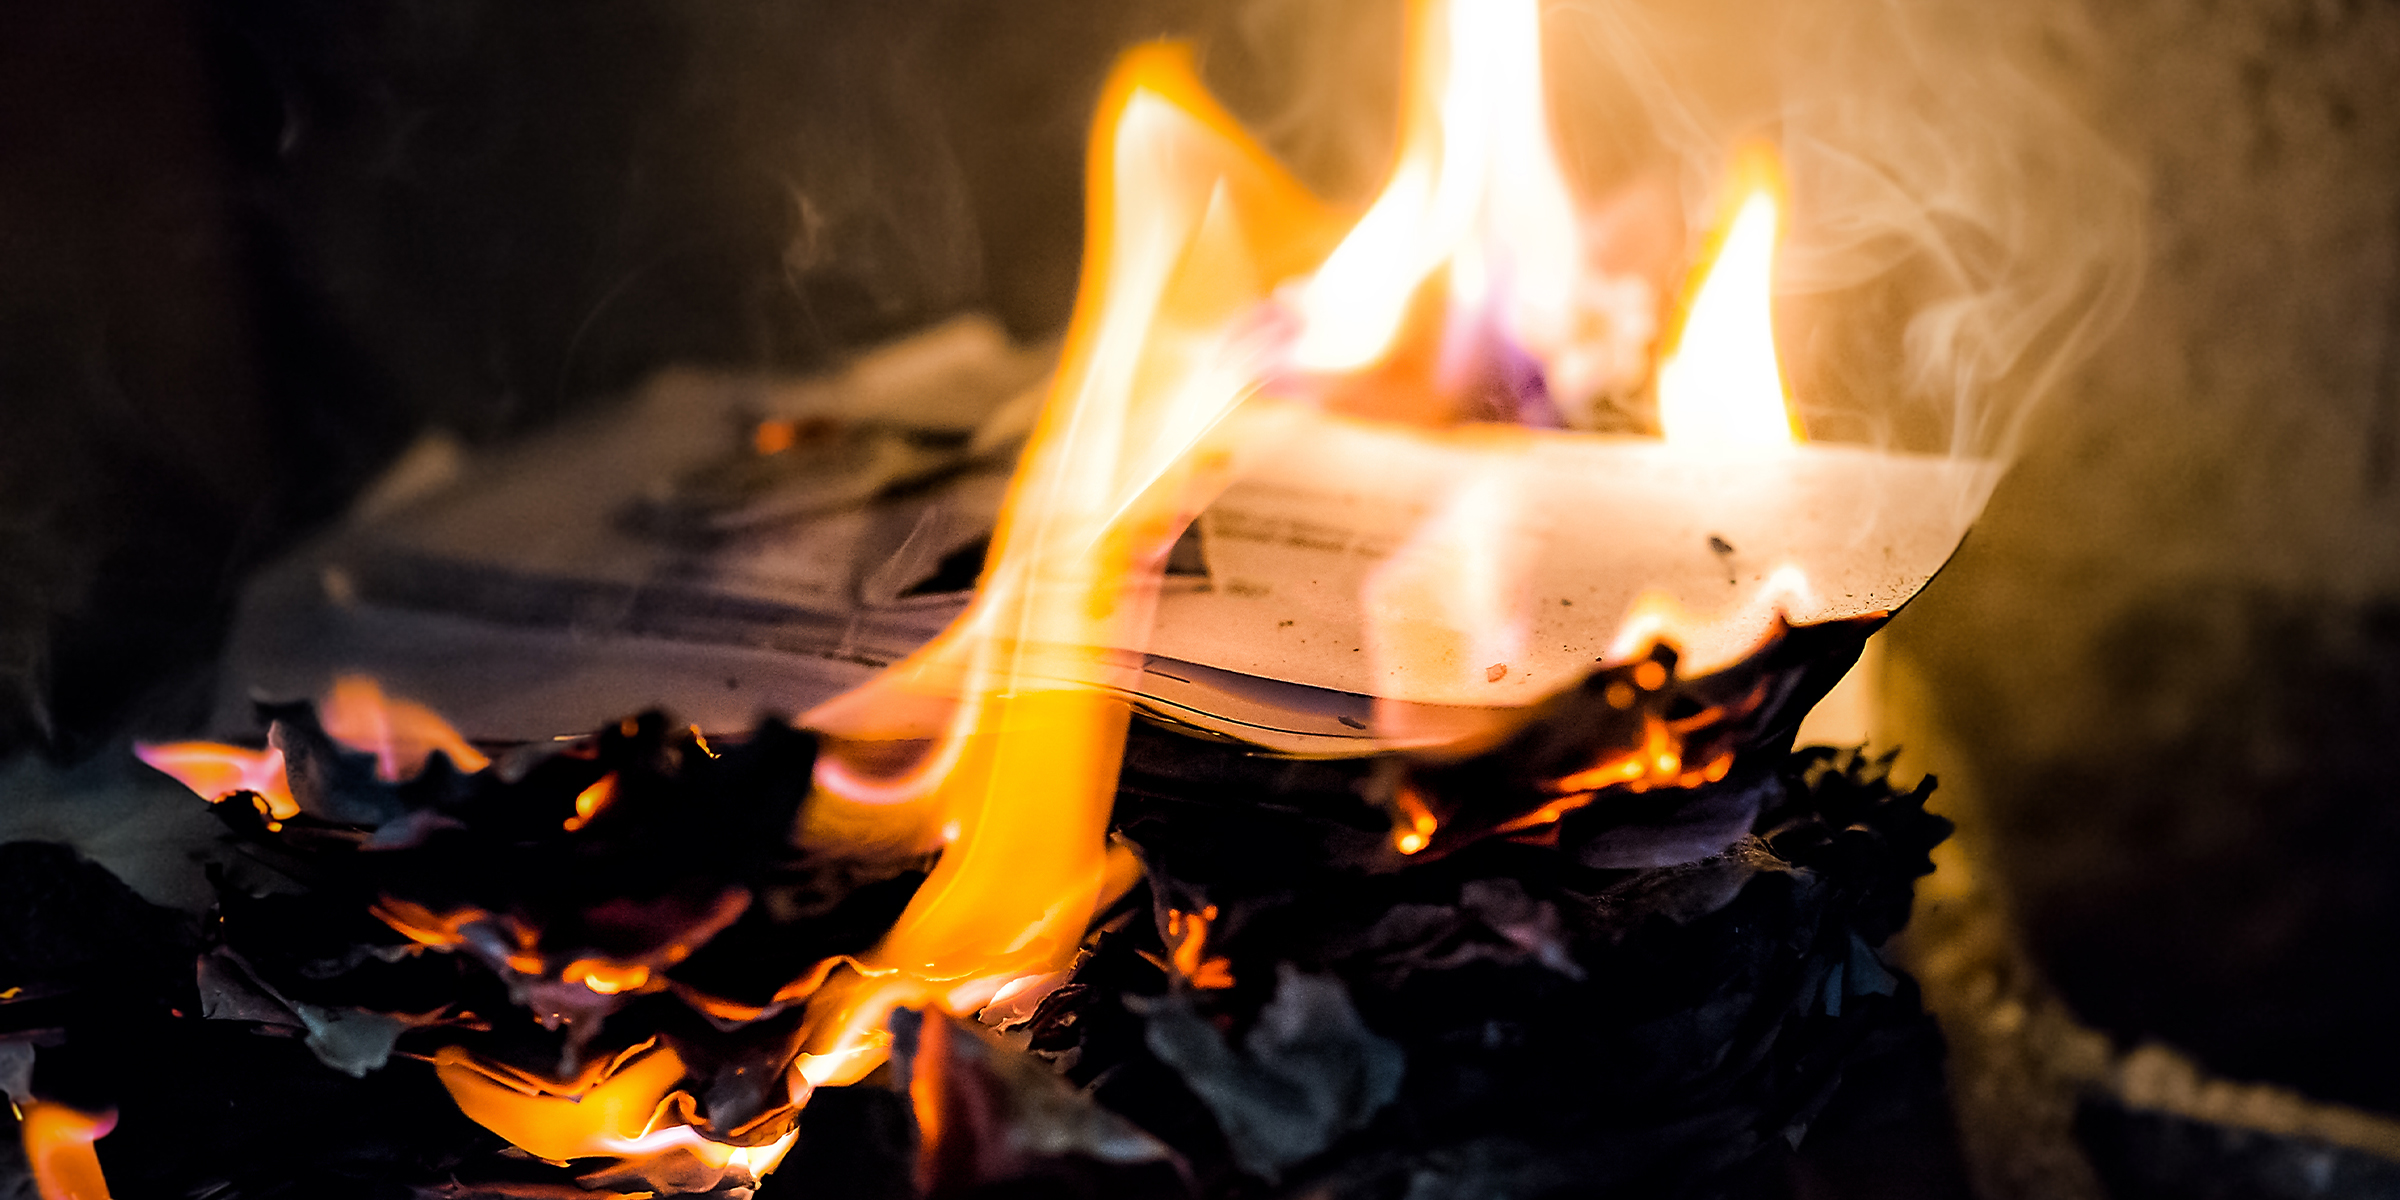 Letters burning in a fireplace | Source: Shutterstock